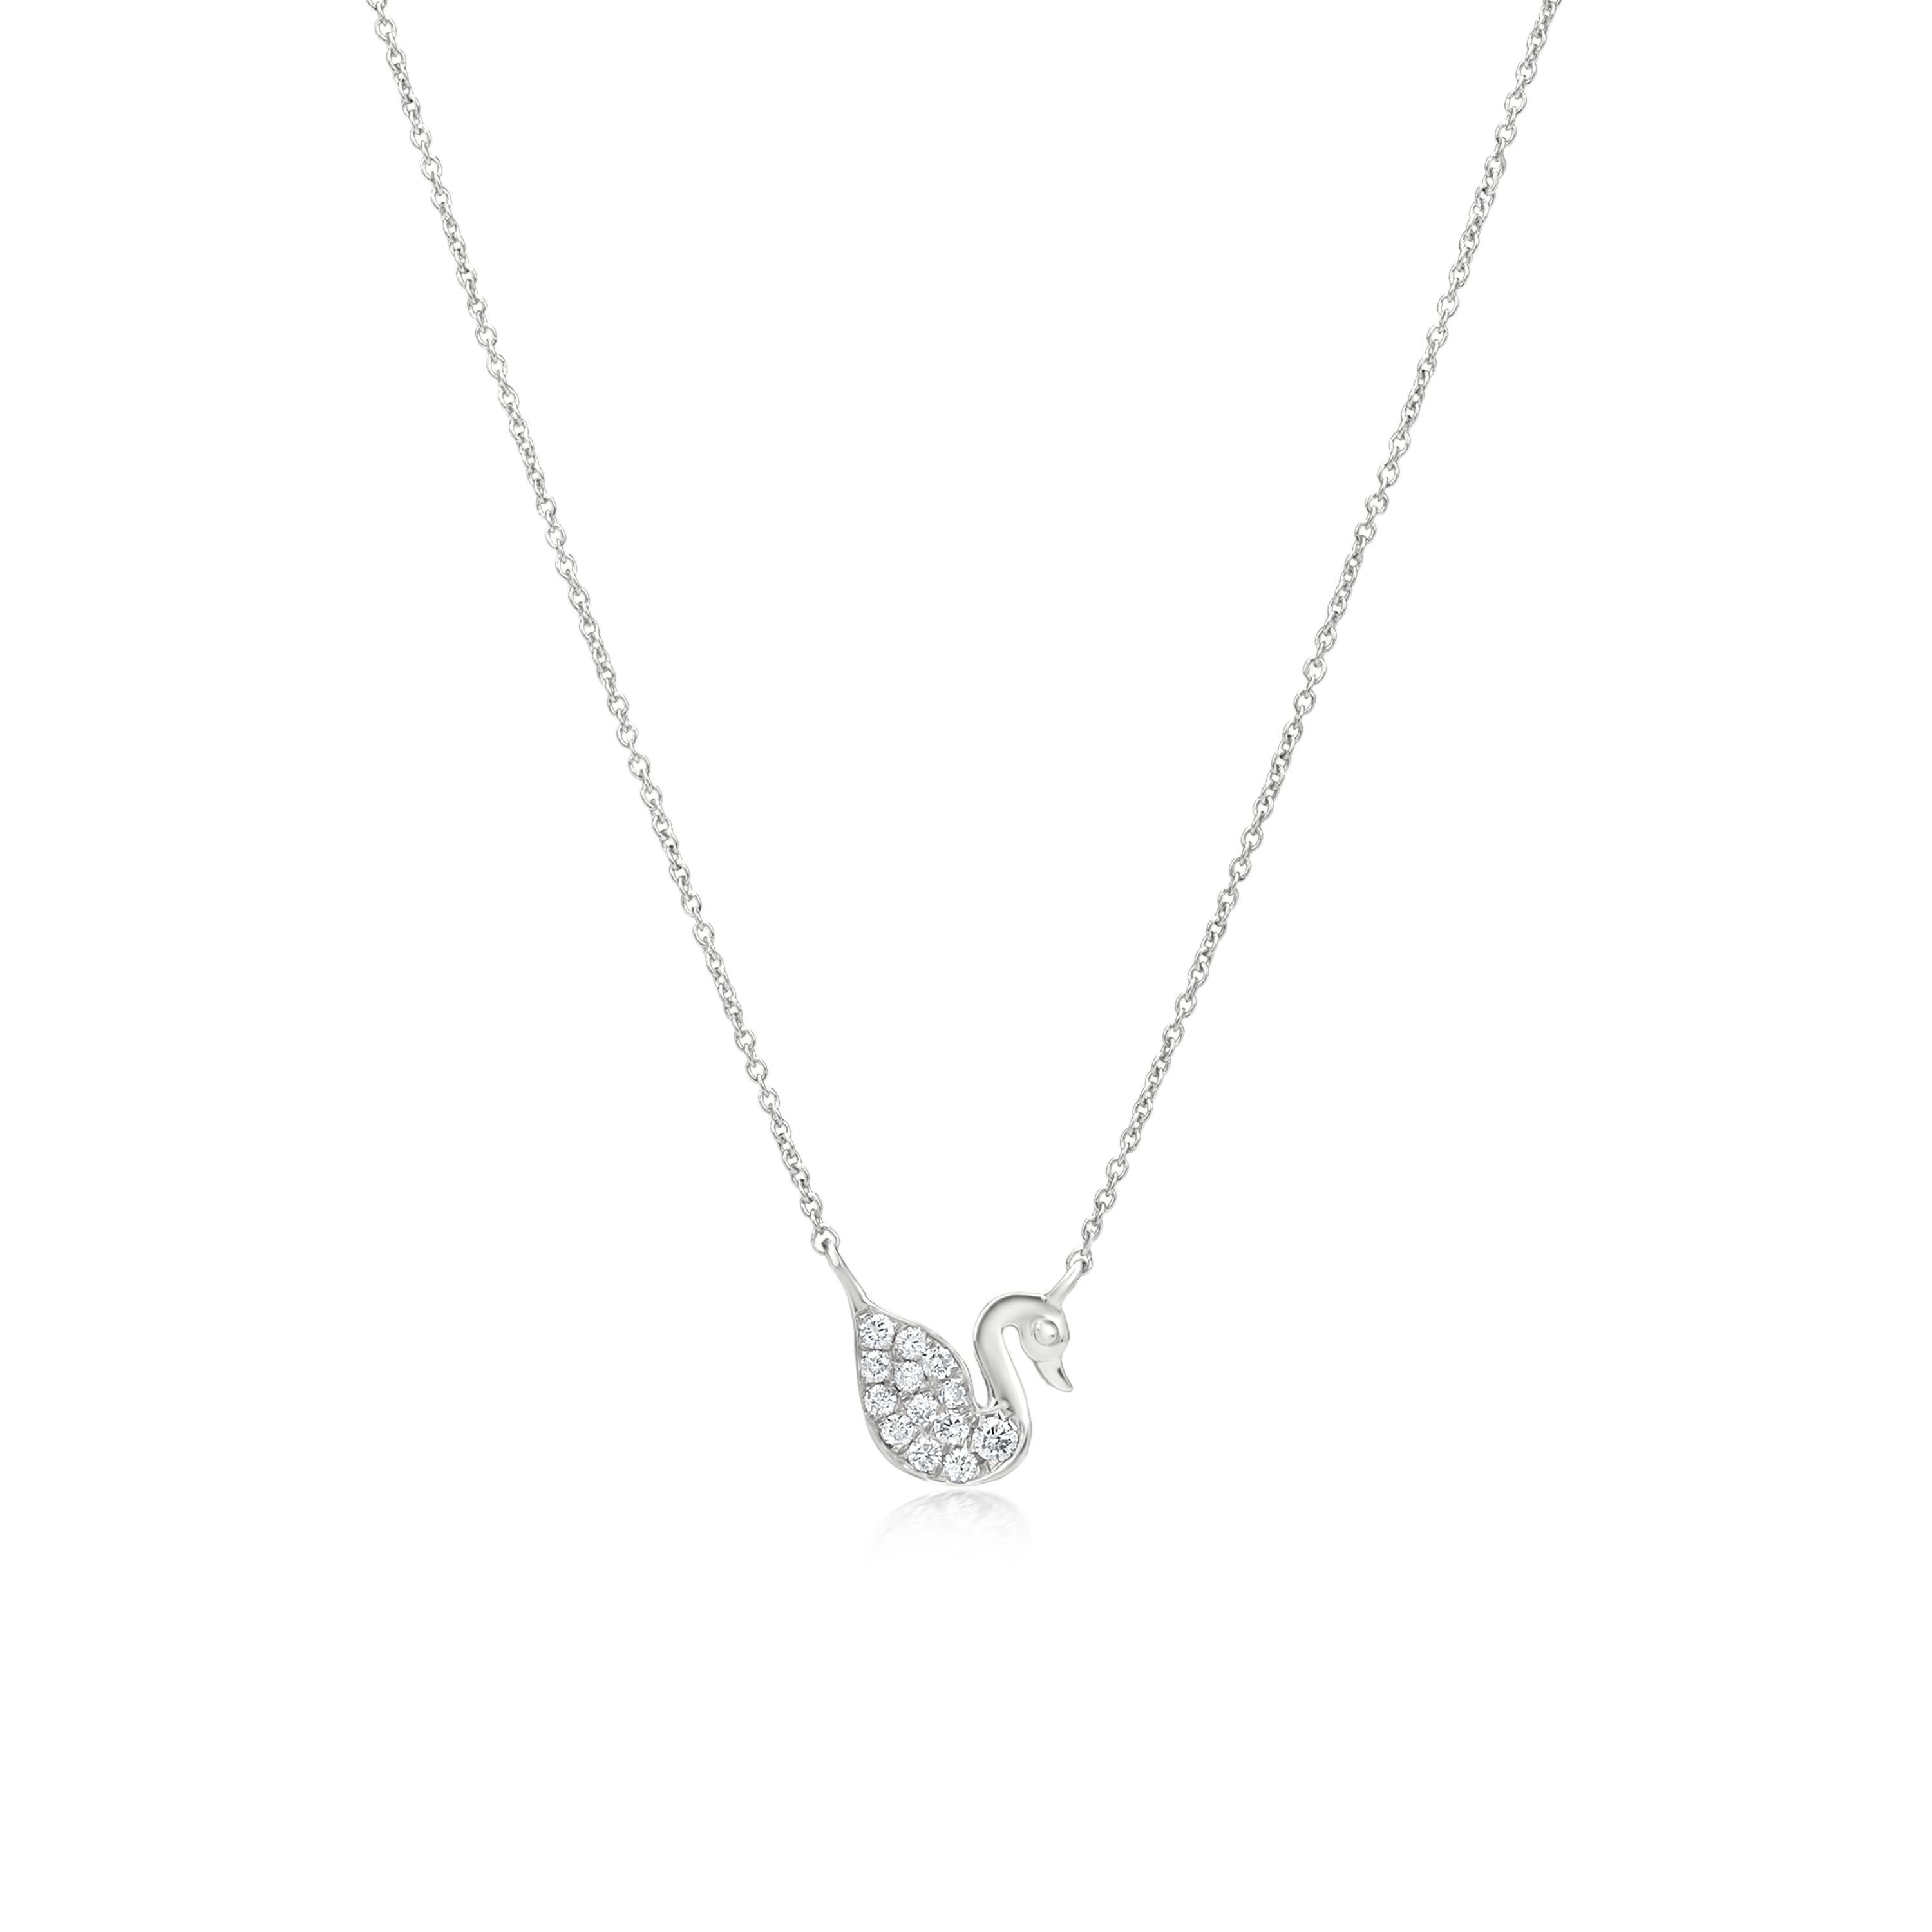 Grace your neckline with a Luxle swan pendant a symbol of fidelity and eternal love. Subtle yet pretty this swan pendant necklace is the new fashion statement. This pendant necklace is featured with 13 round cut diamonds, totaling 0.10Cts